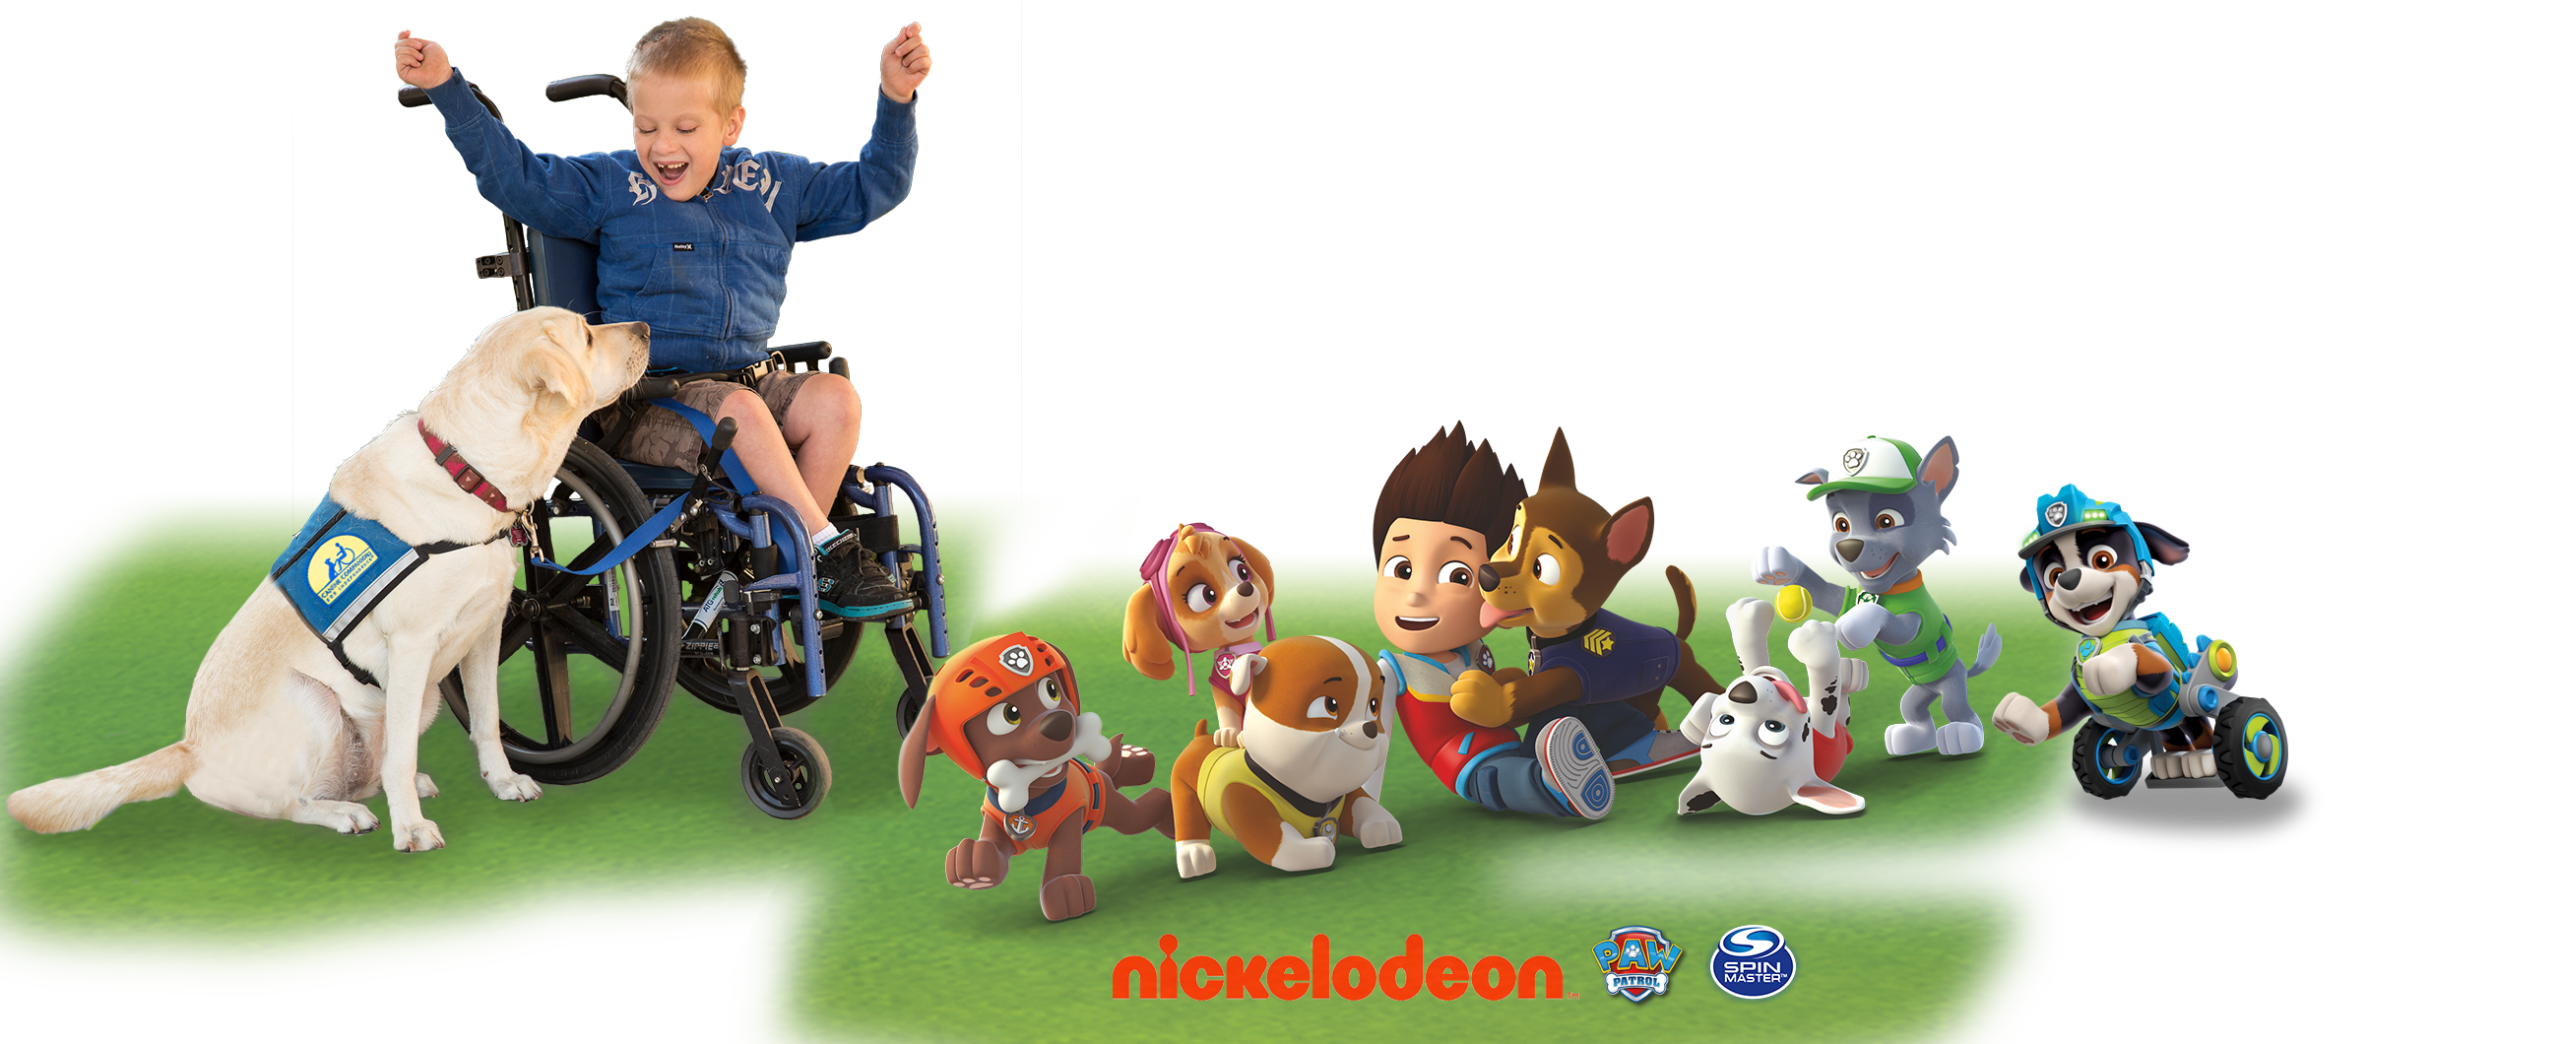 Canine Companions service dog, child and PawPatrol characters